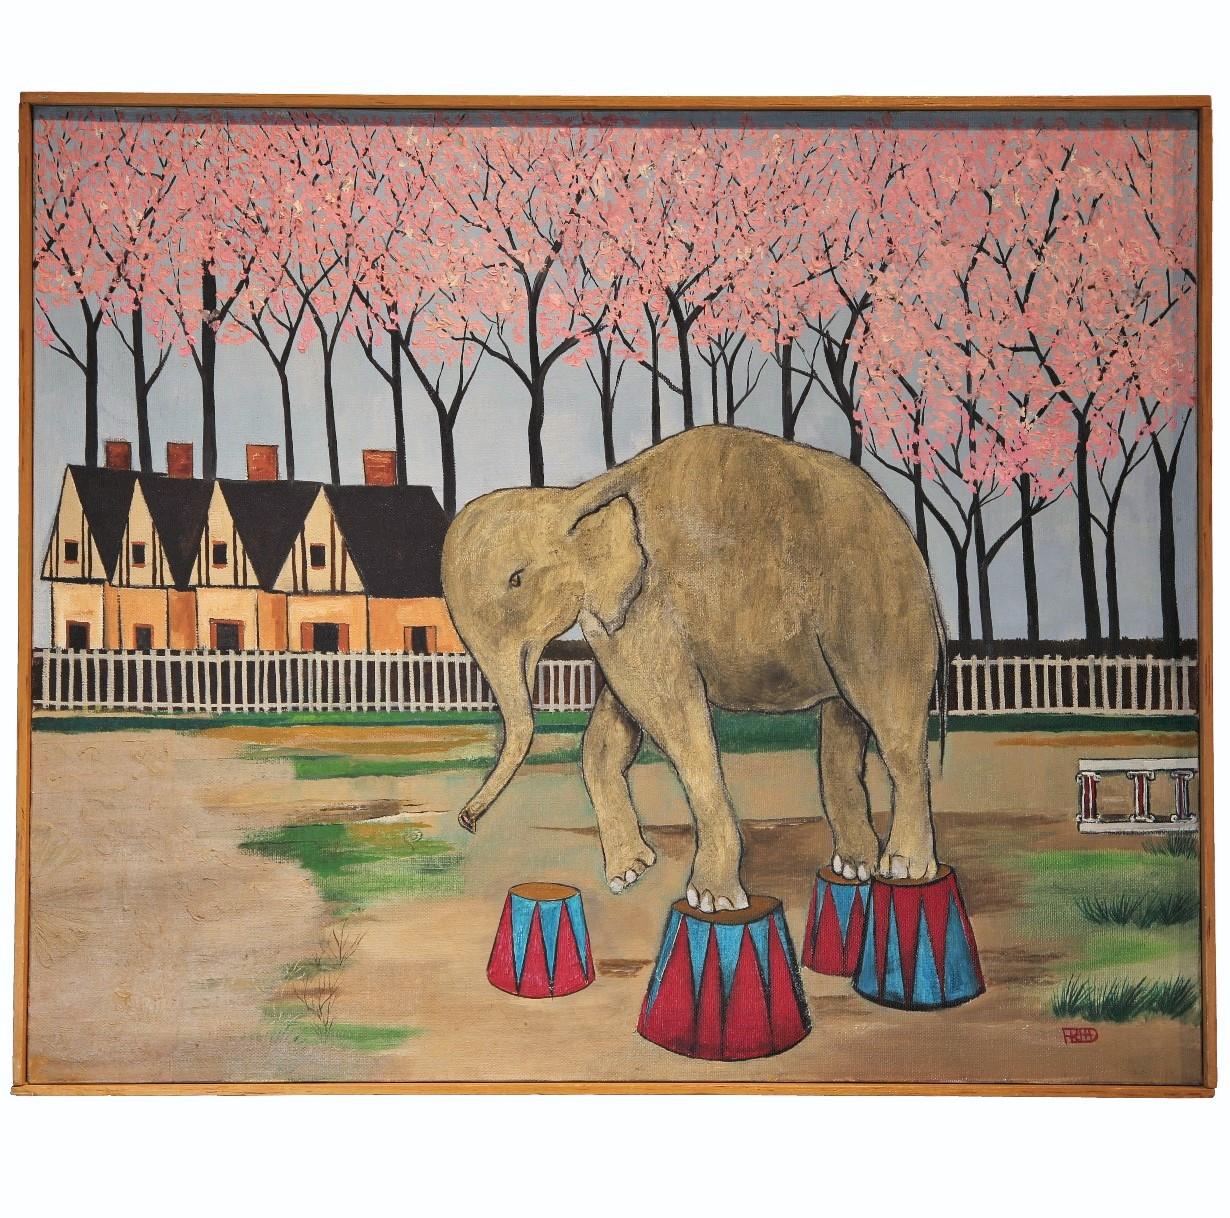 Details about   Original Vintage Circus Elephant Afraid Of Mouse Iron On Transfer 